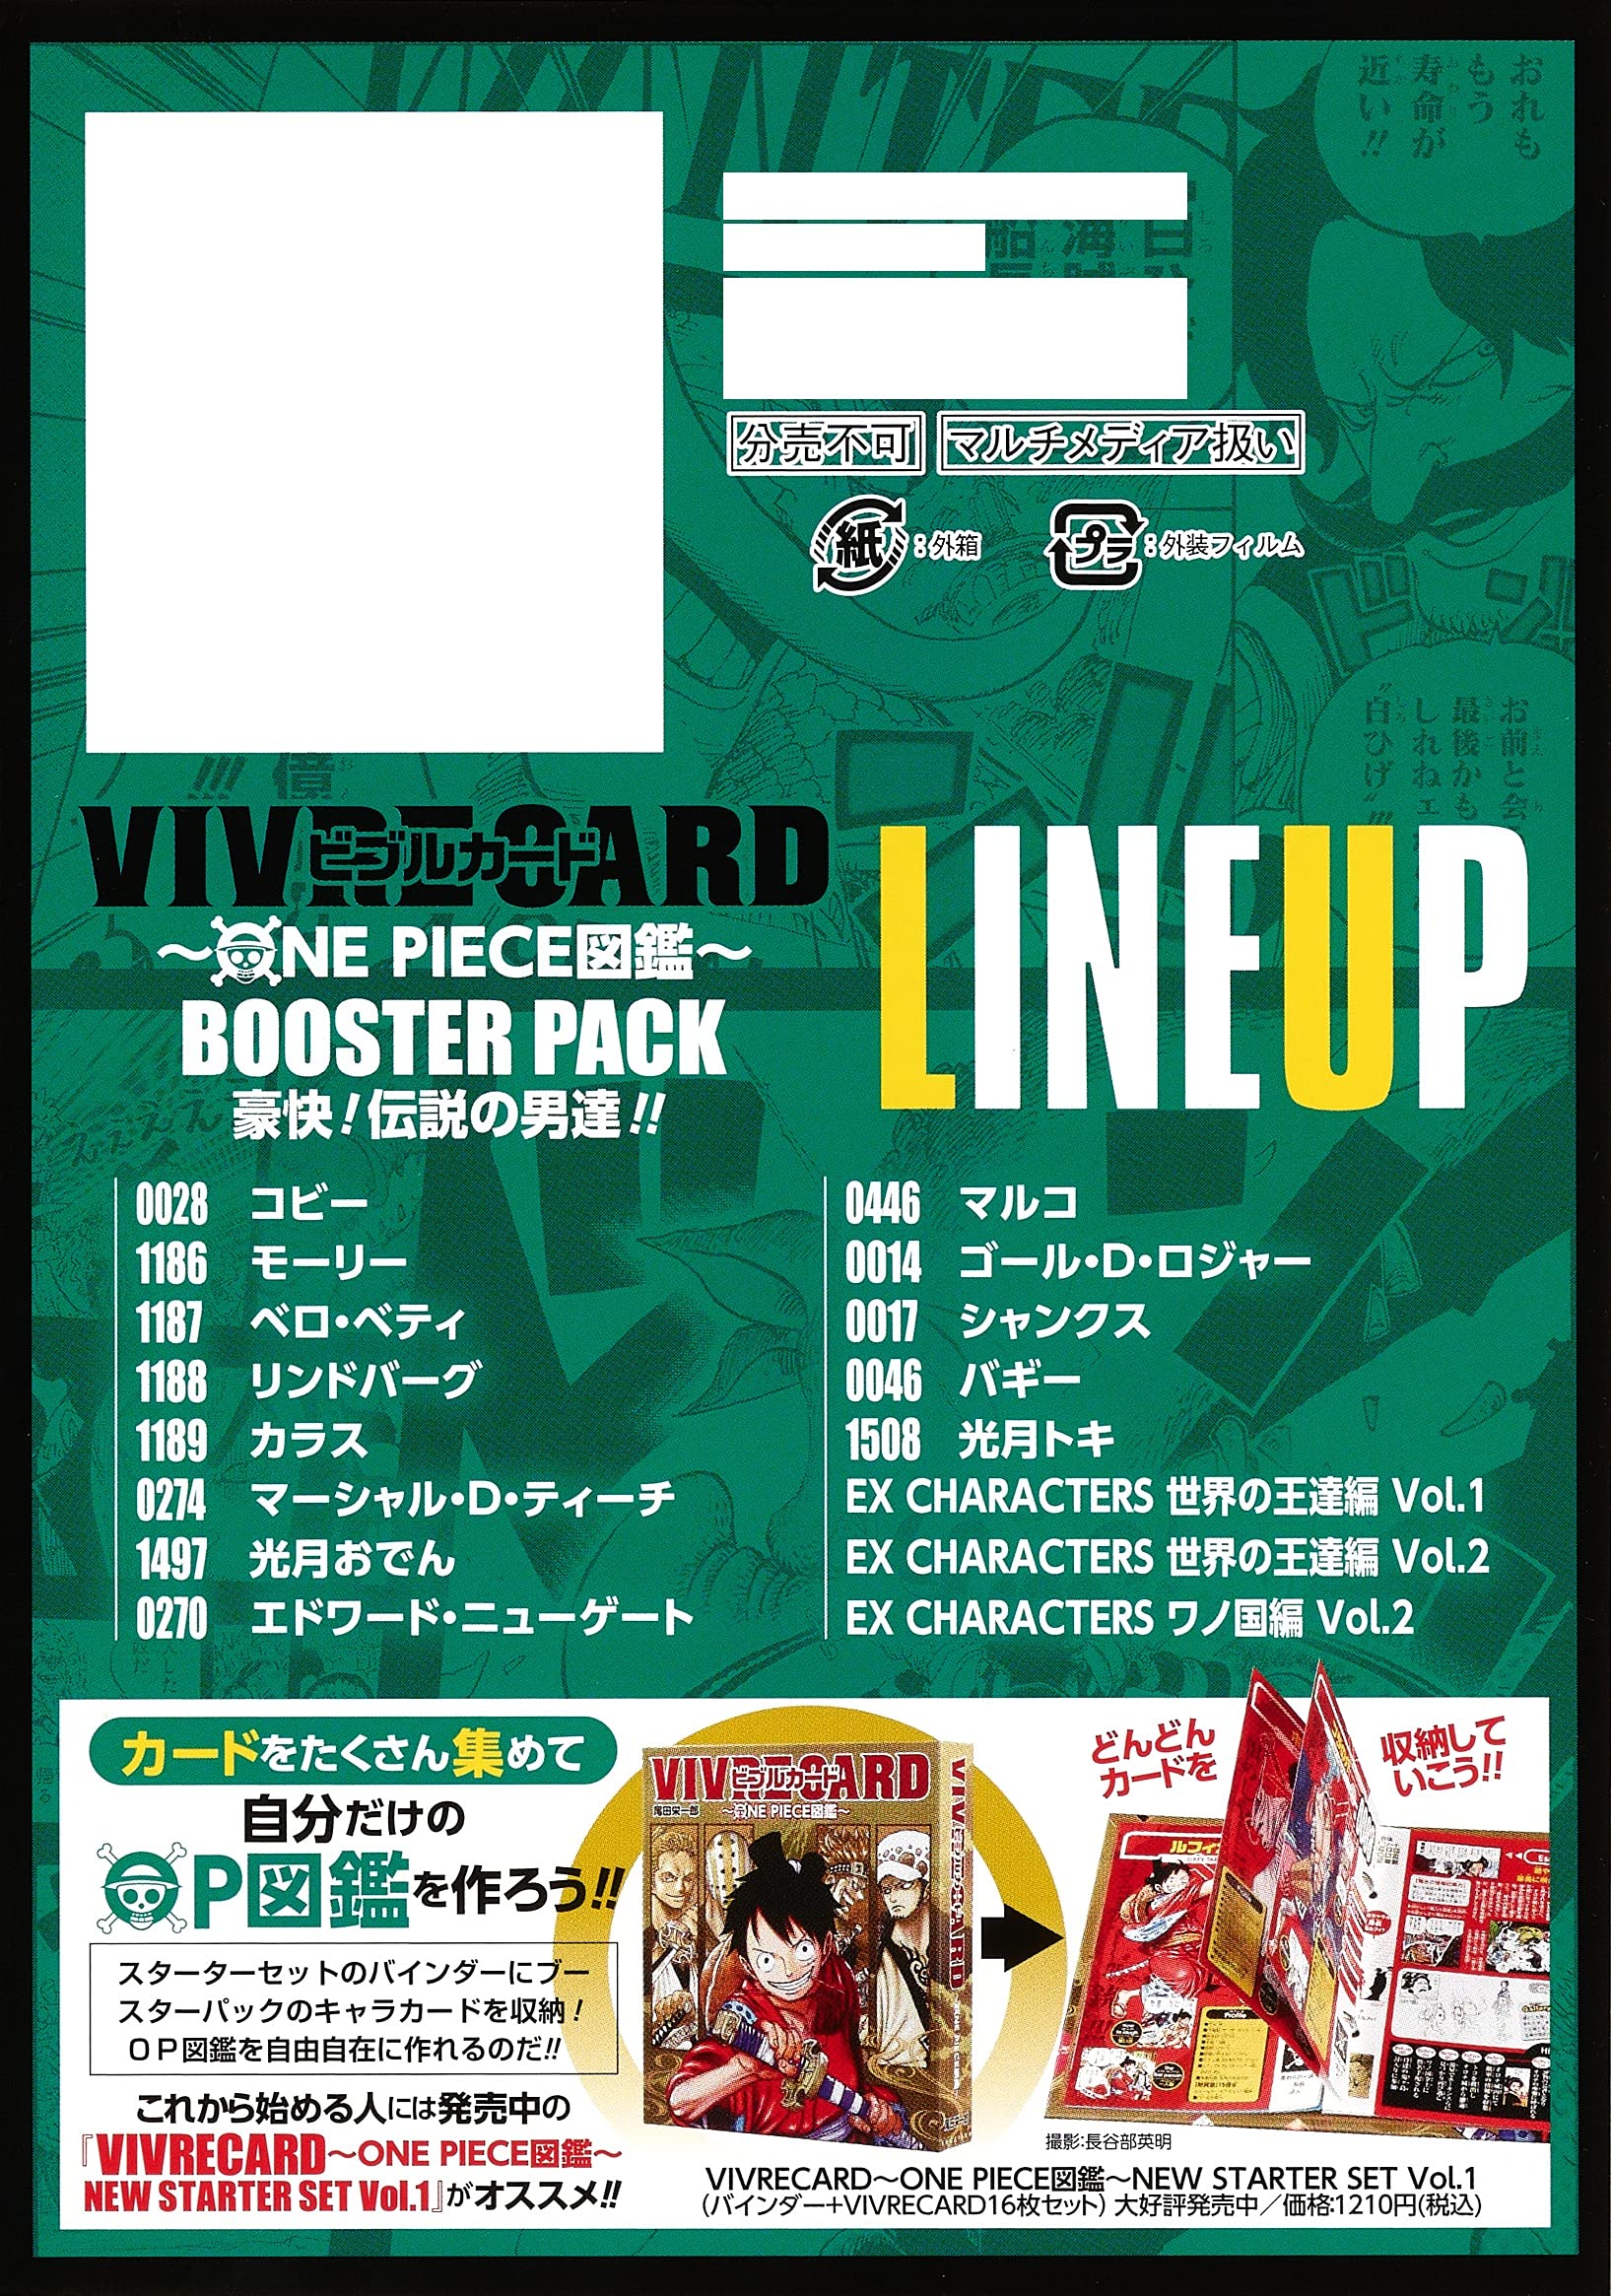 Vivre Card One Piece Visual Dictionary Booster Pack Exciting Legendary Men Japanese Book Store